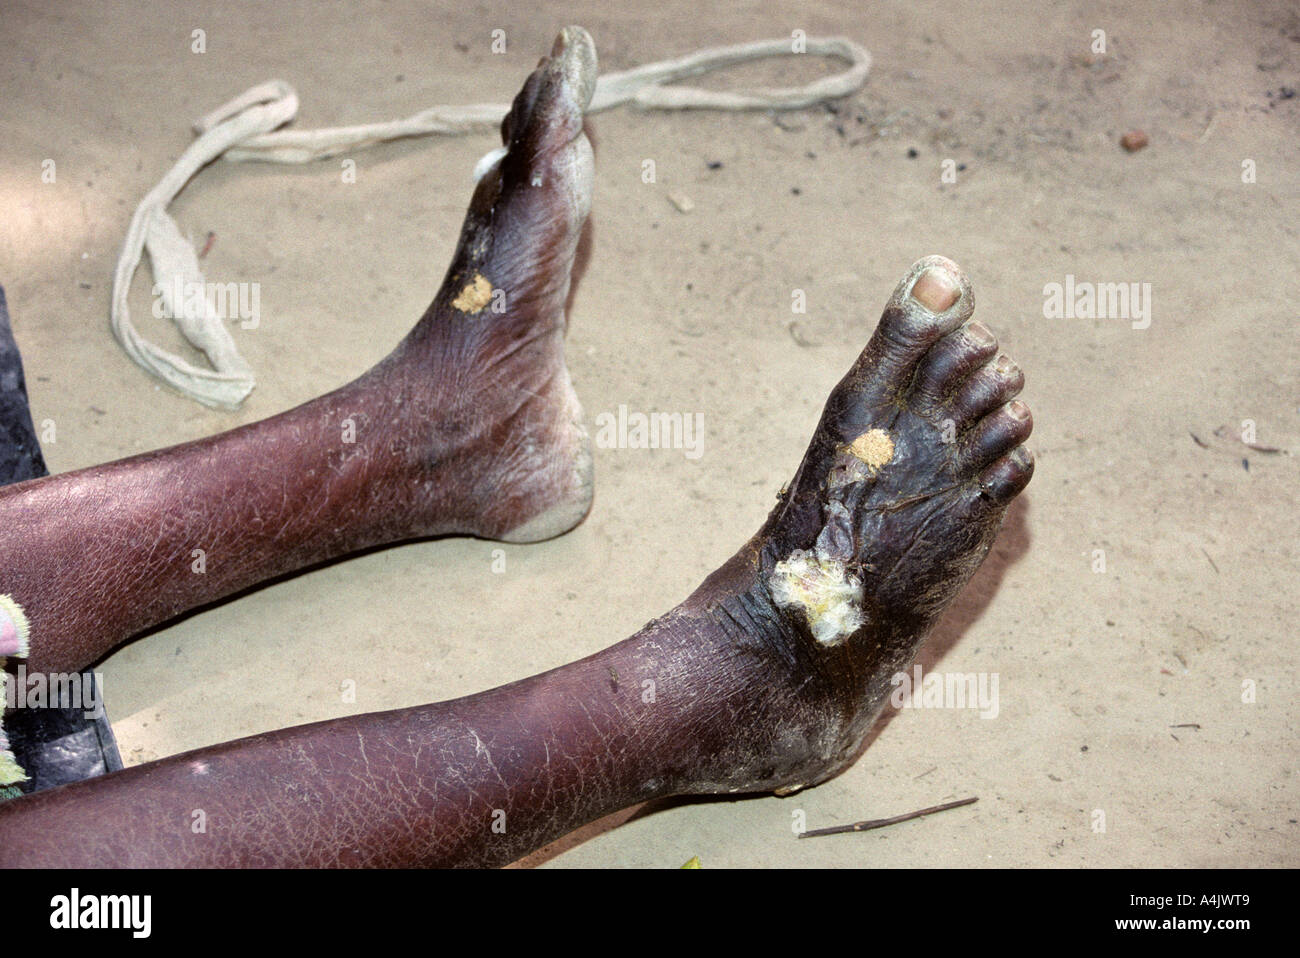 Yorobodi, Ivory Coast, Cote d'Ivoire, Africa. Sores healing after Guinea worm extraction.  208.11 Stock Photo